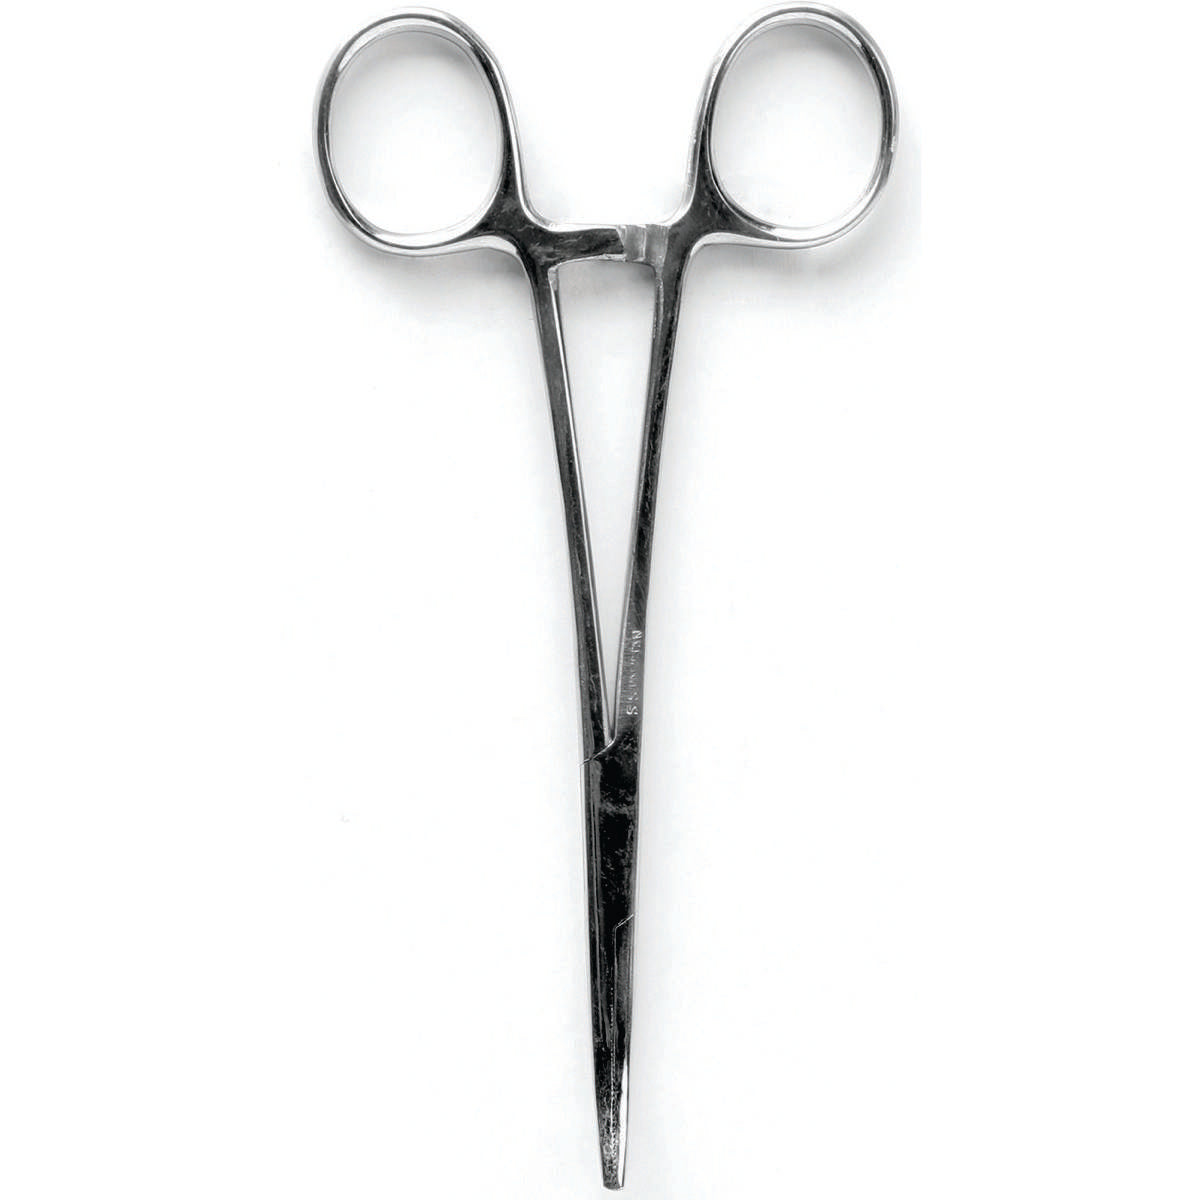 Photo of Eagle Claw Forceps Hook Remover for sale at United Tackle Shops.